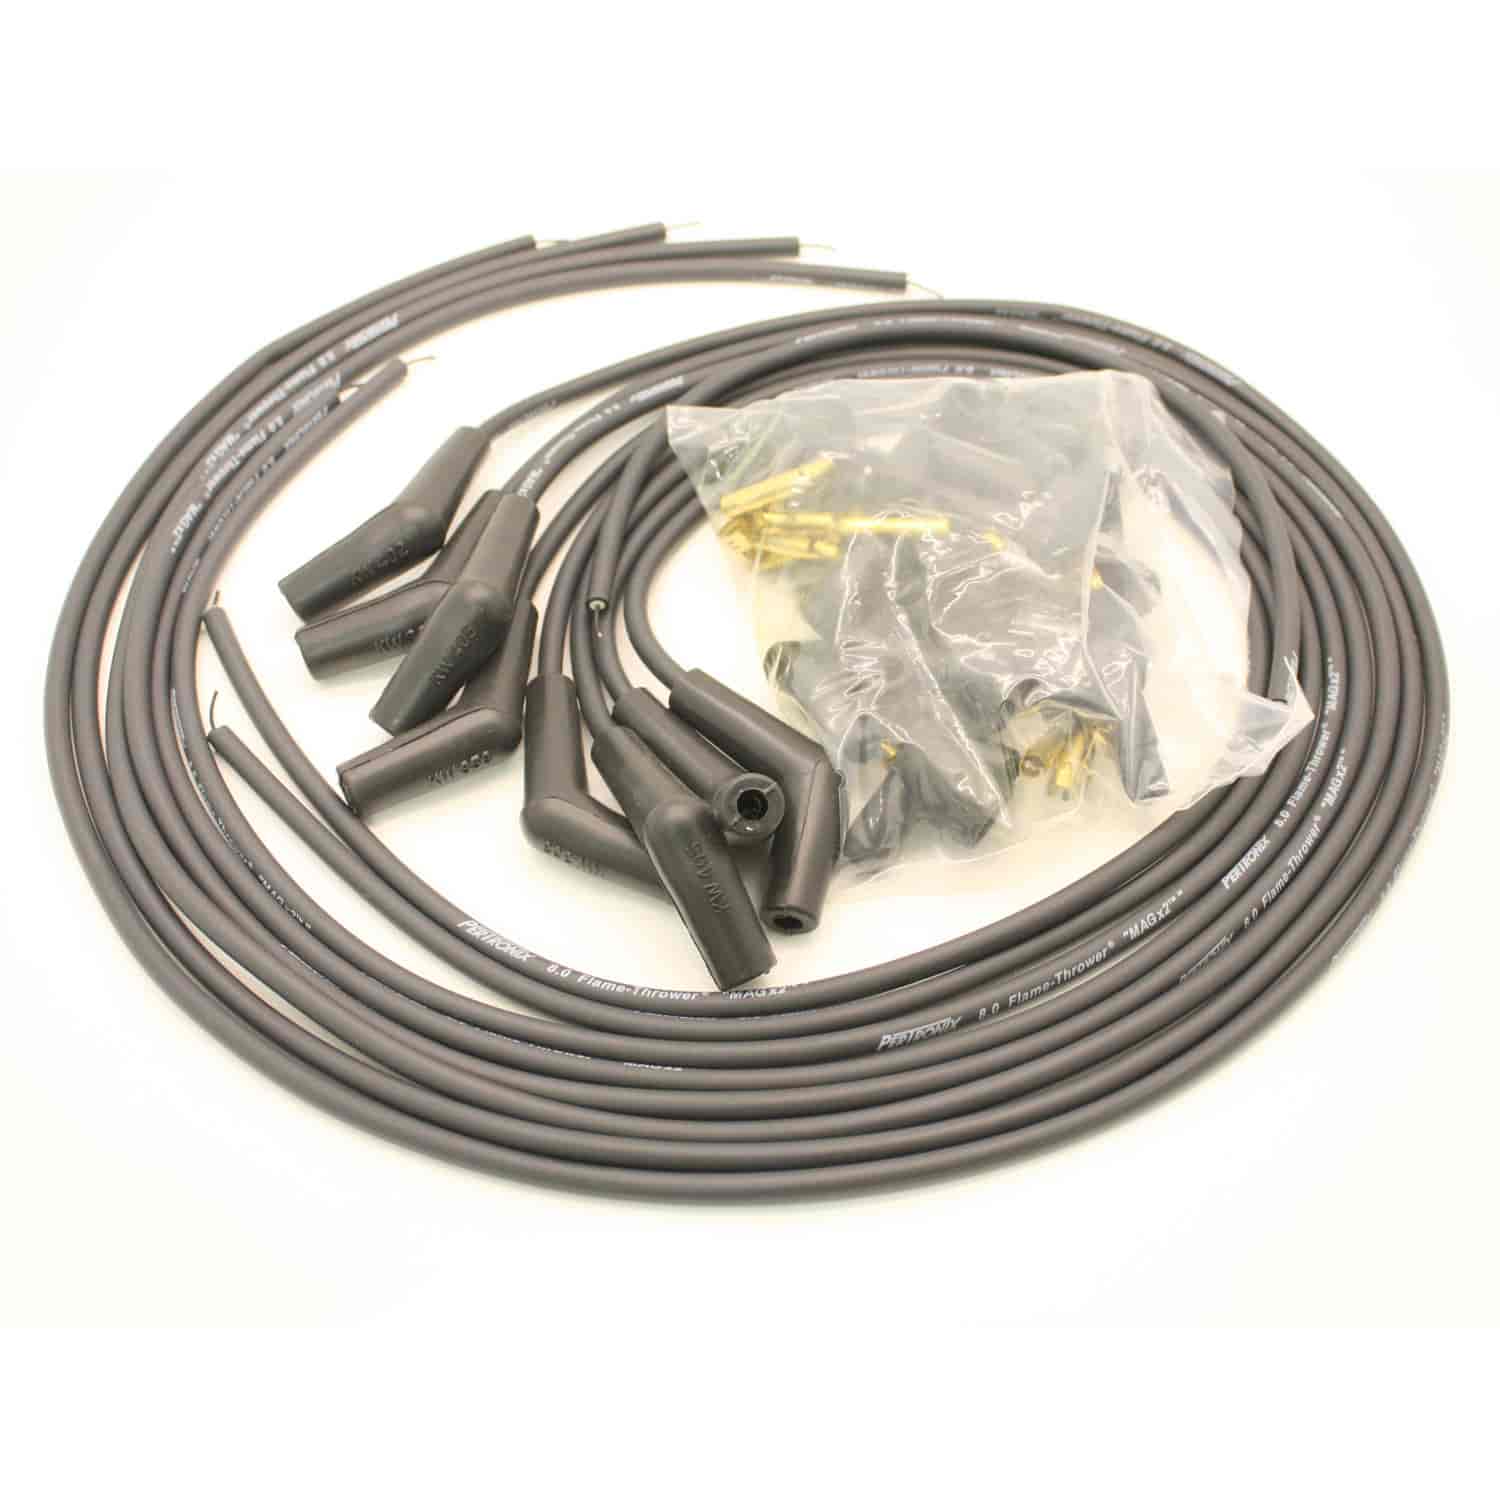 PerTronix 808290 Flame-Thrower Spark Plug Wires 8 cyl 8mm